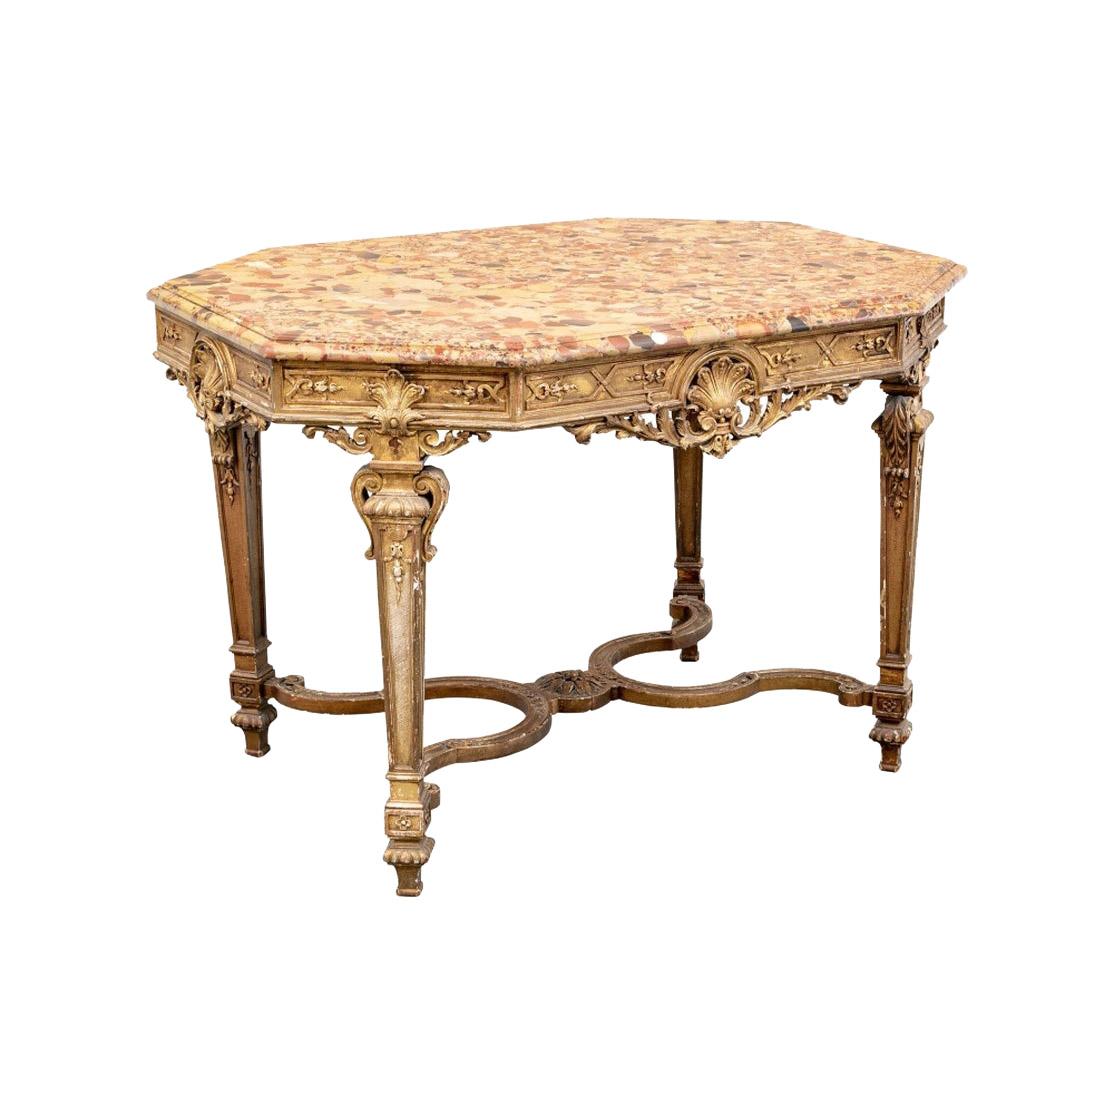 Very Fine Antique Neoclassical Gilt Marble Top Center Table For Sale